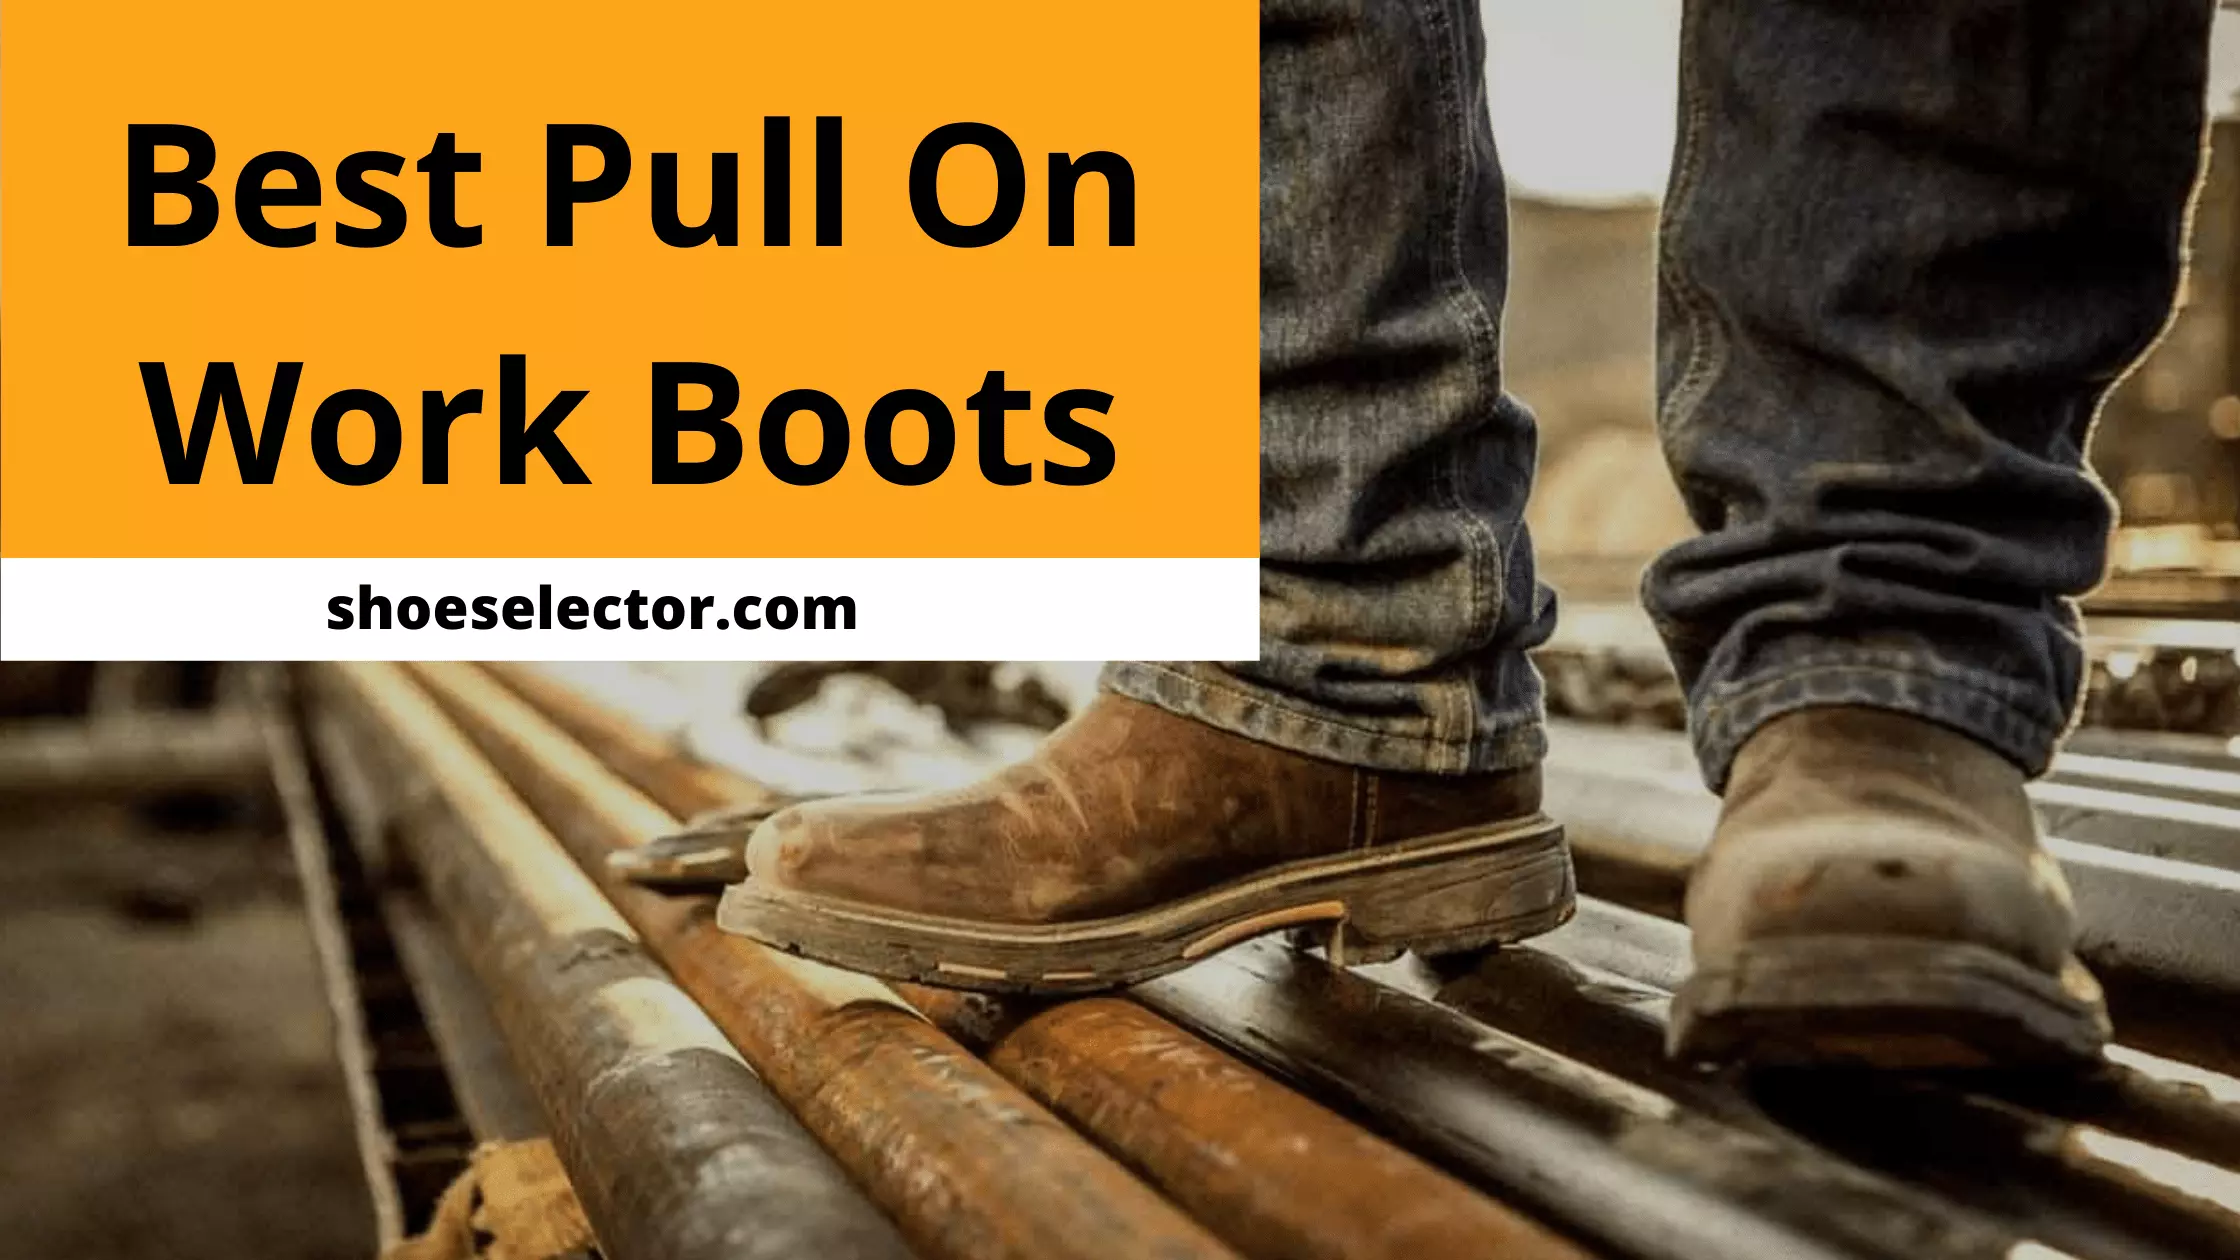 Best Pull On Work Boots -  Most Popular Brands Reviewed